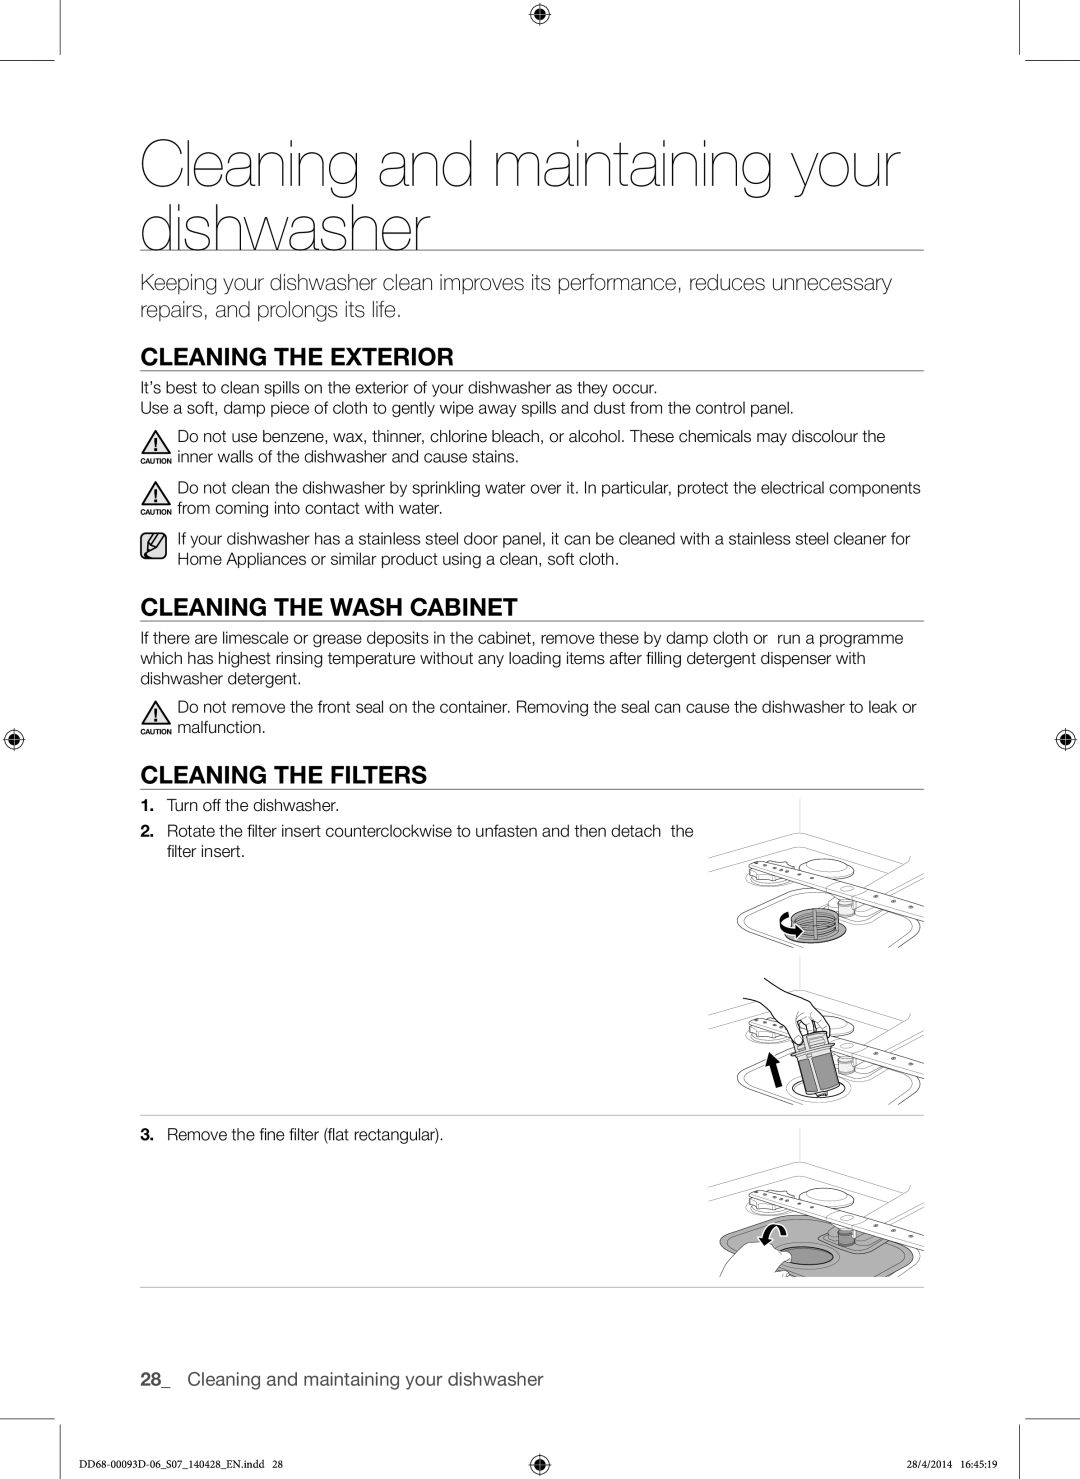 Samsung DW-FG520W/XTR manual Cleaning and maintaining your dishwasher, Cleaning The Exterior, Cleaning The Wash Cabinet 